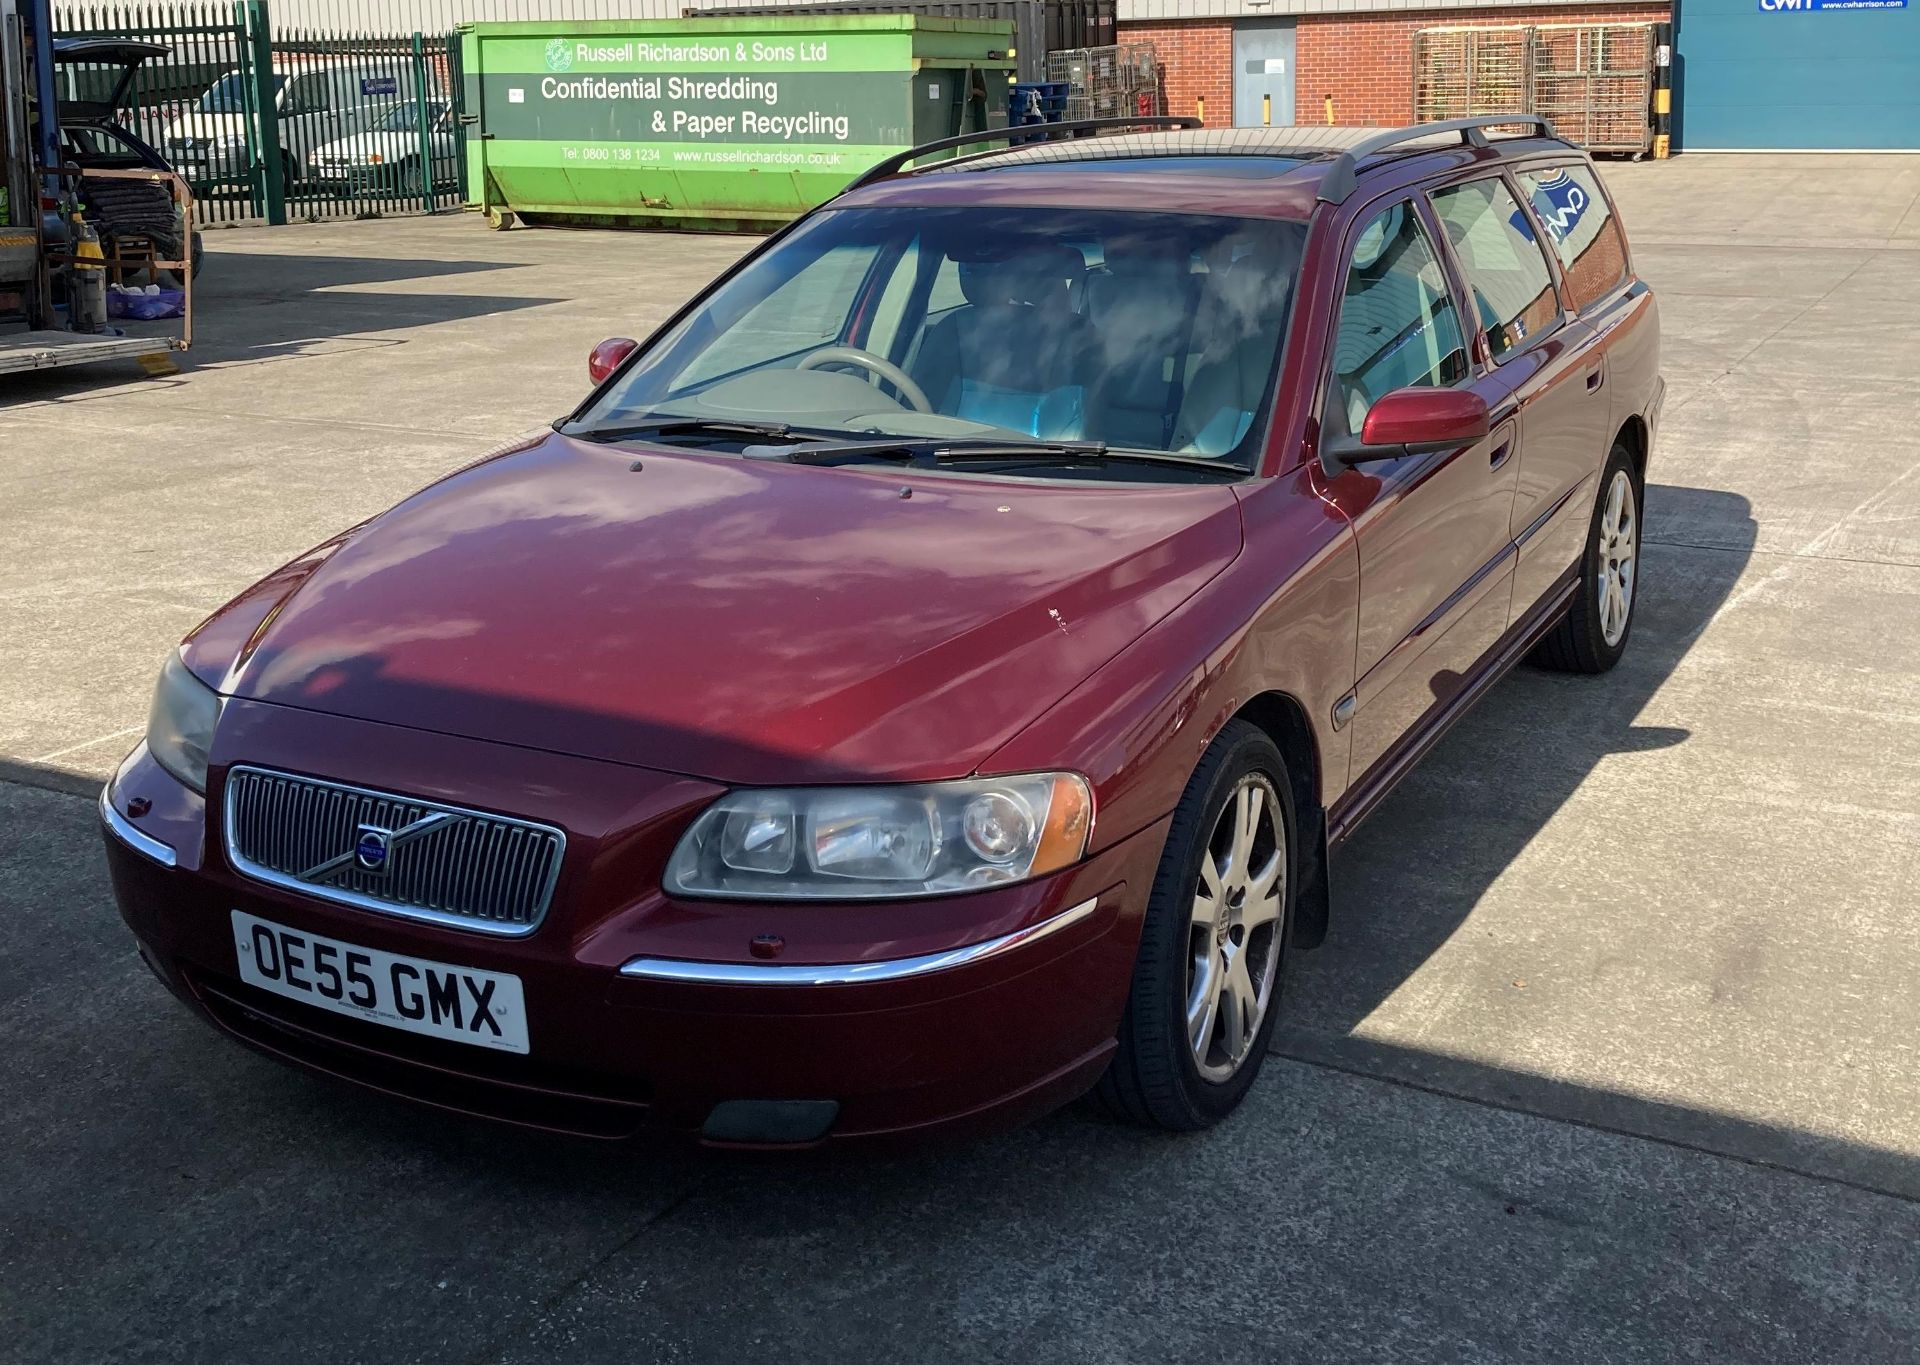 VOLVO V70 24D ESTATE AUTOMATIC - Diesel - Red - Cream leather interior. - Image 3 of 11